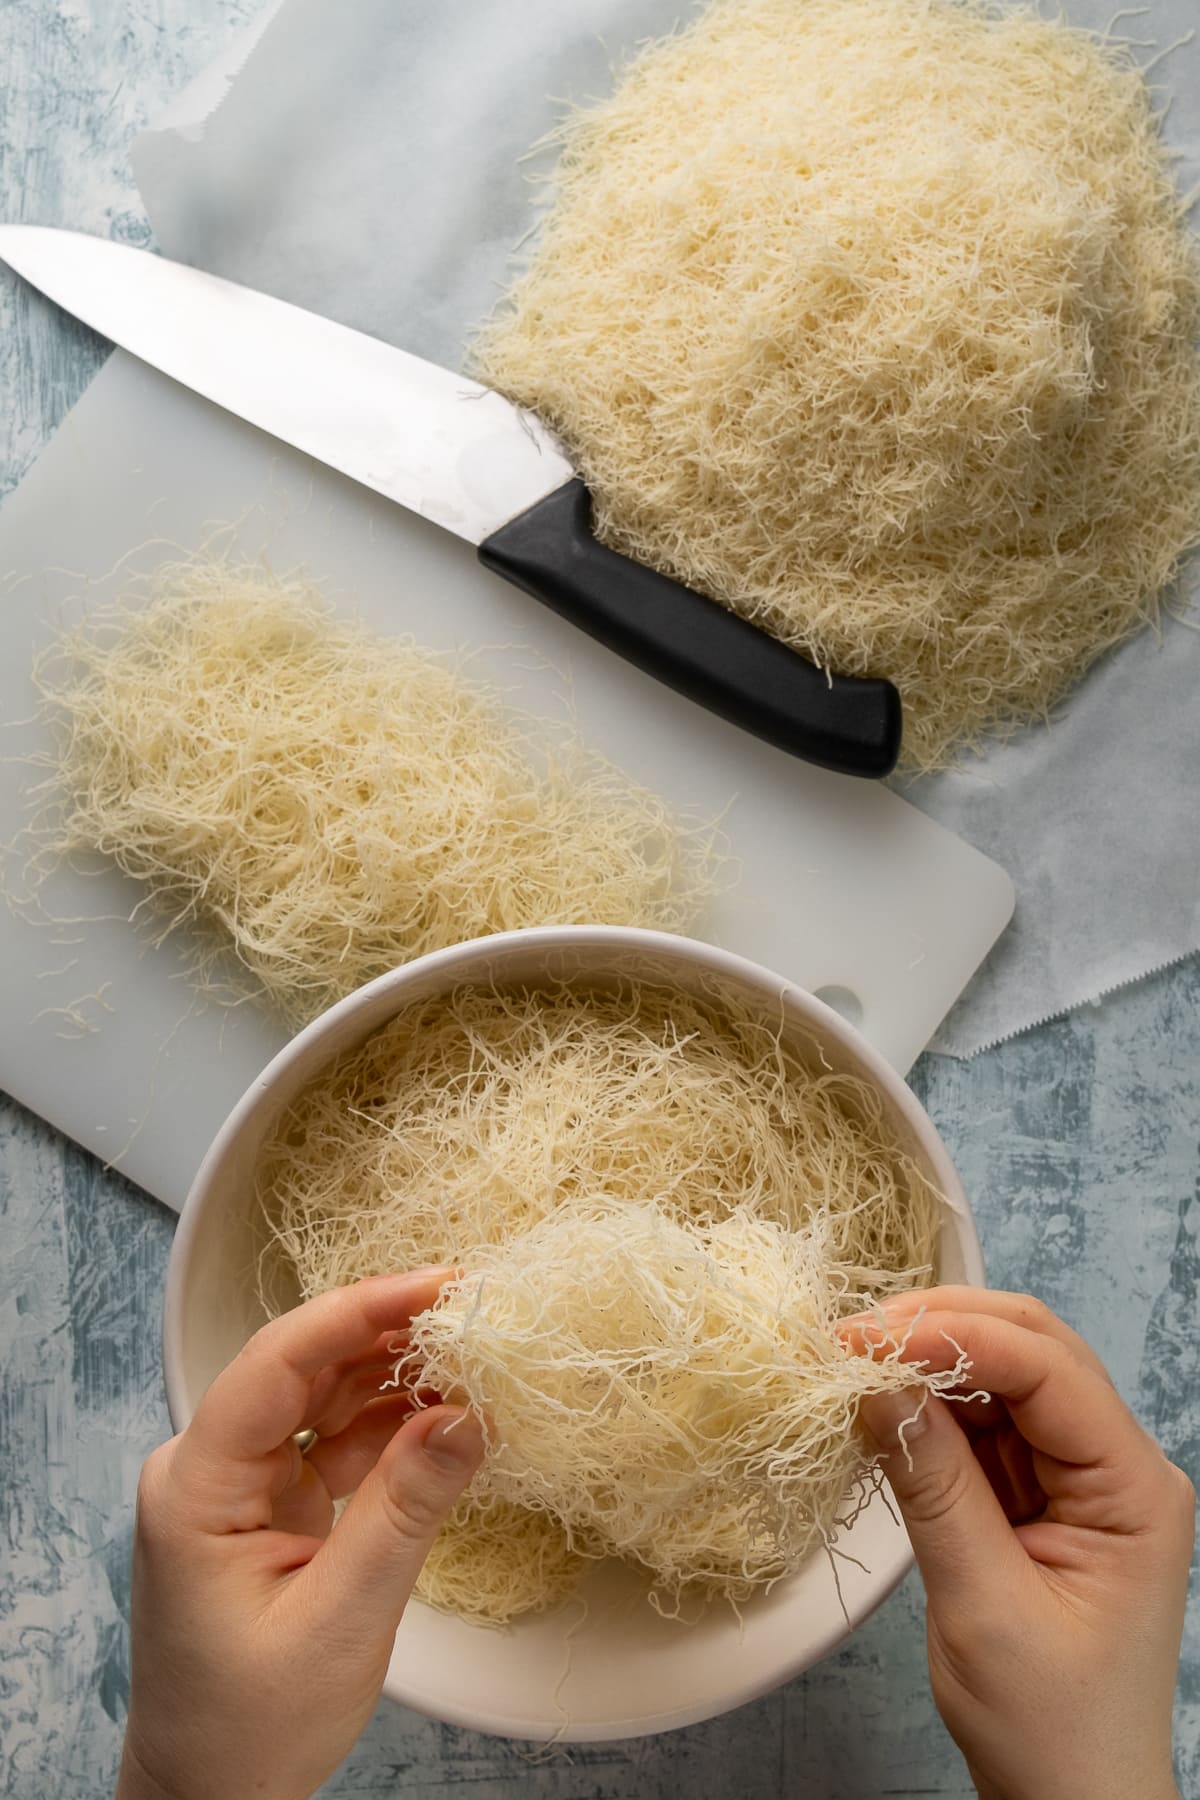 Hands shredding kadaif noodles in a bowl, more noodles on a cutting board and on a piece of baking paper and a knife on the ground.